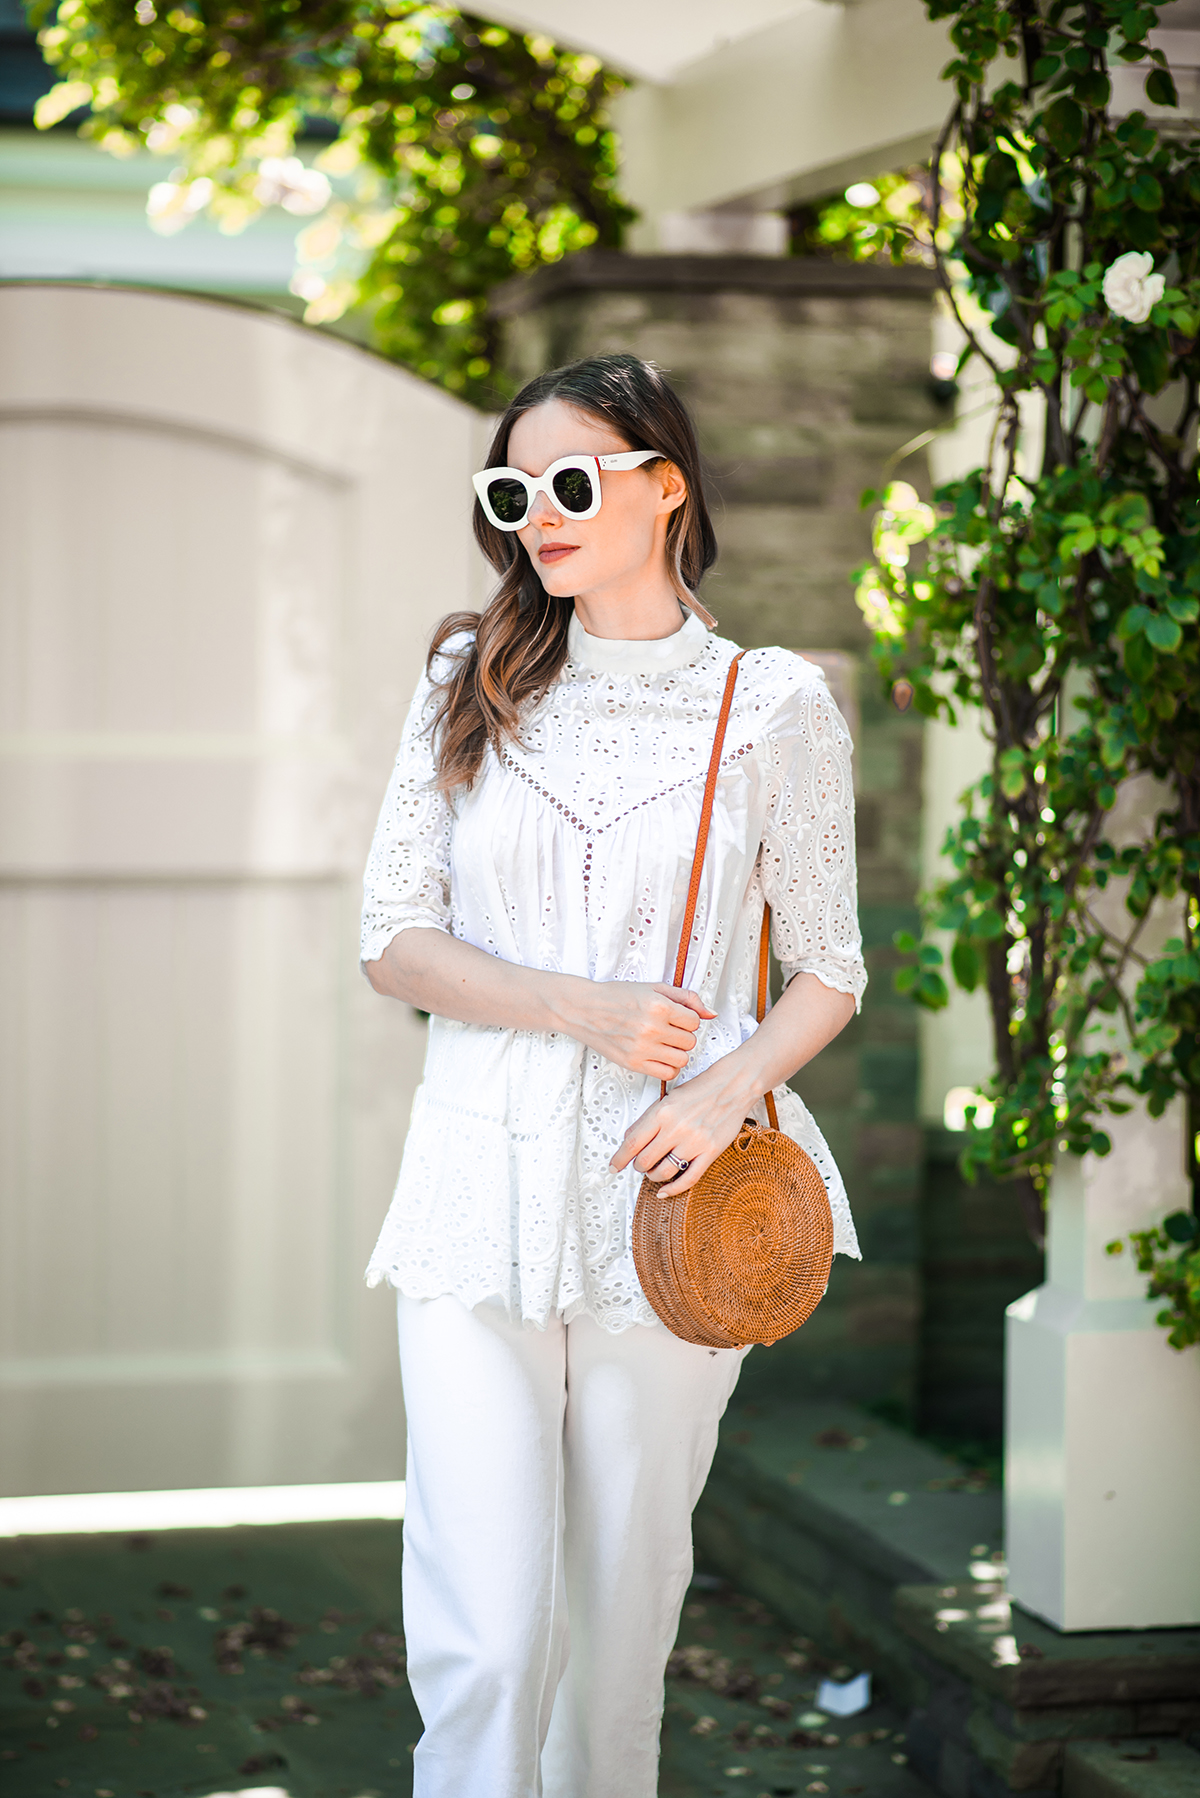 Alyssa Campanella of The A List blog wearing white eyelet Zimmermann top and Rebecca Taylor jeans